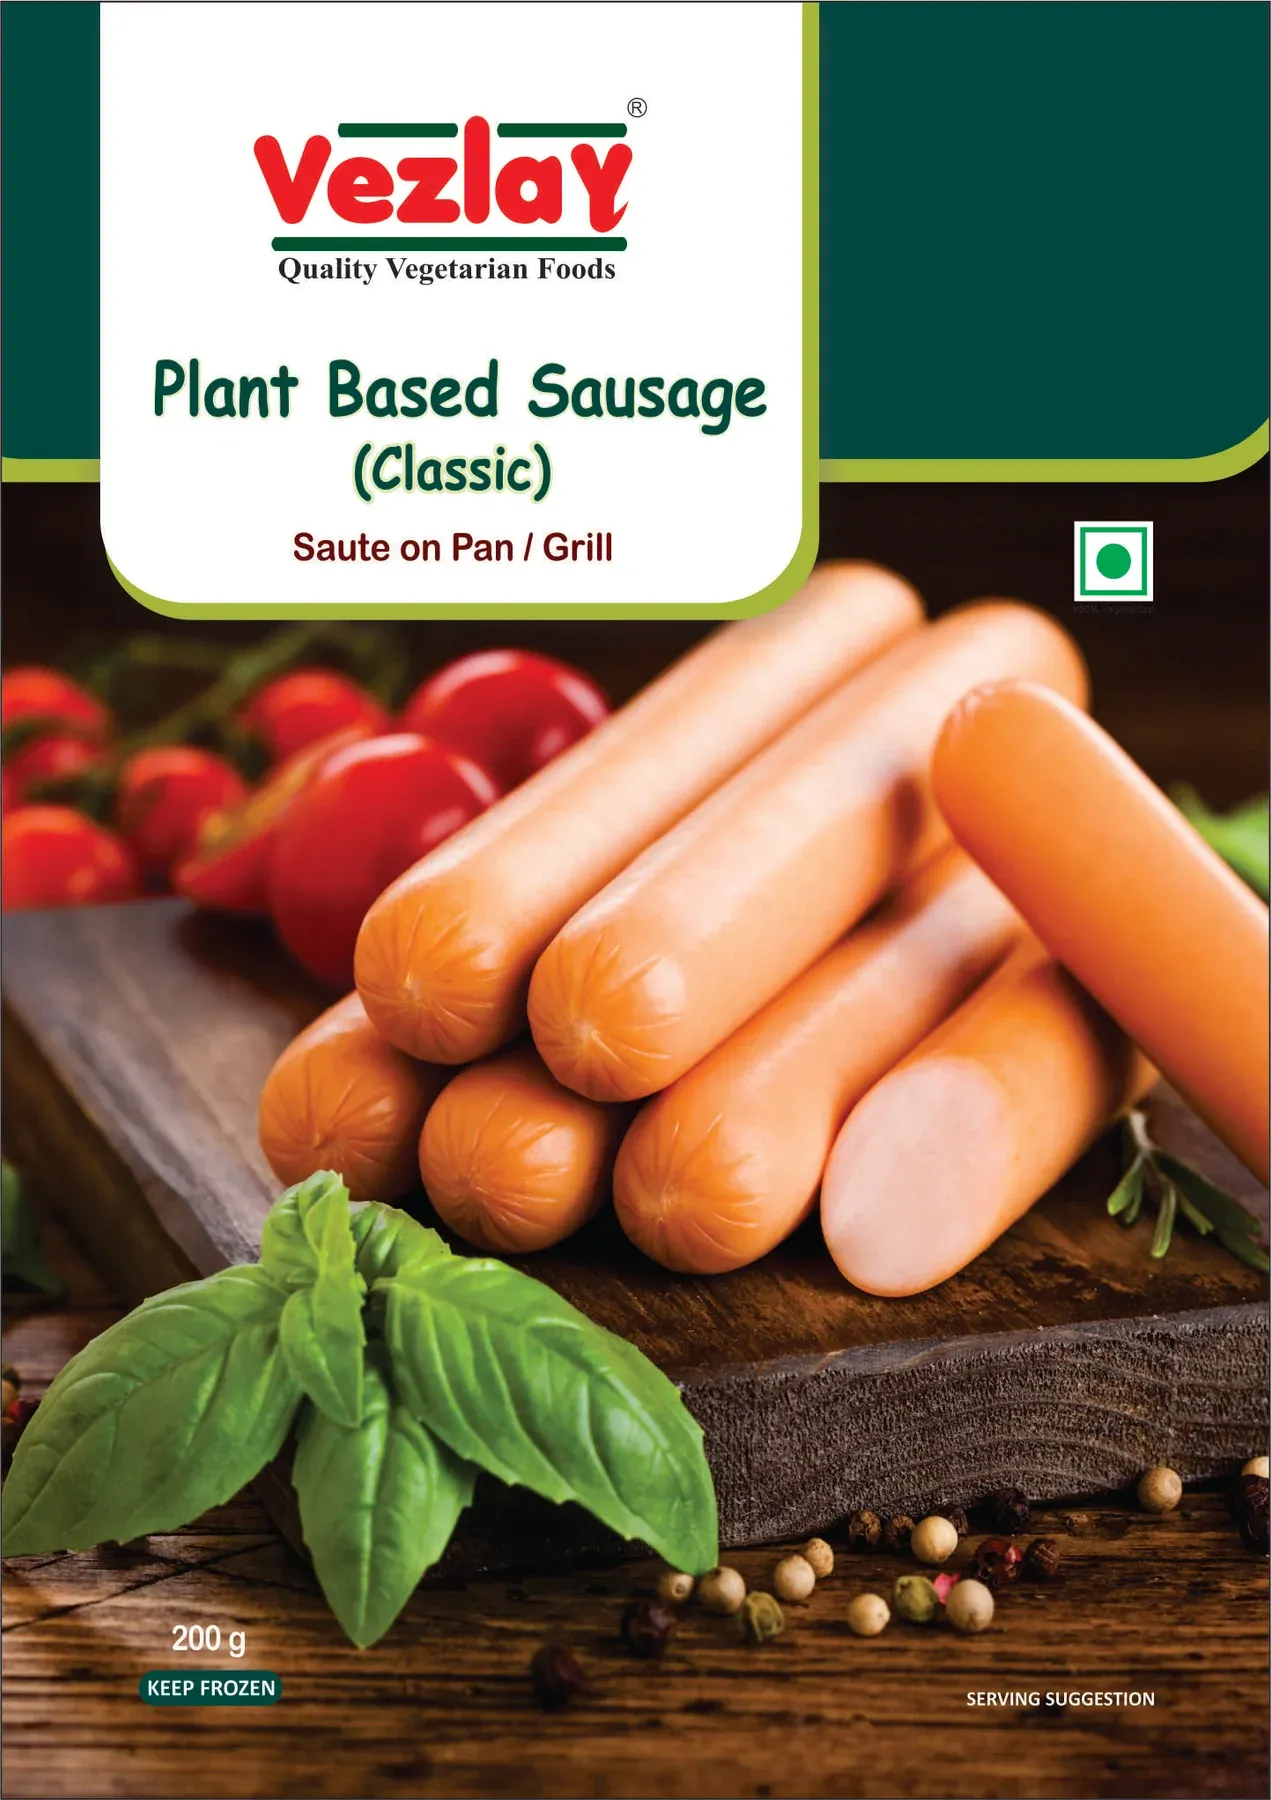 Vezlay Plant Based Sausages Classic Image